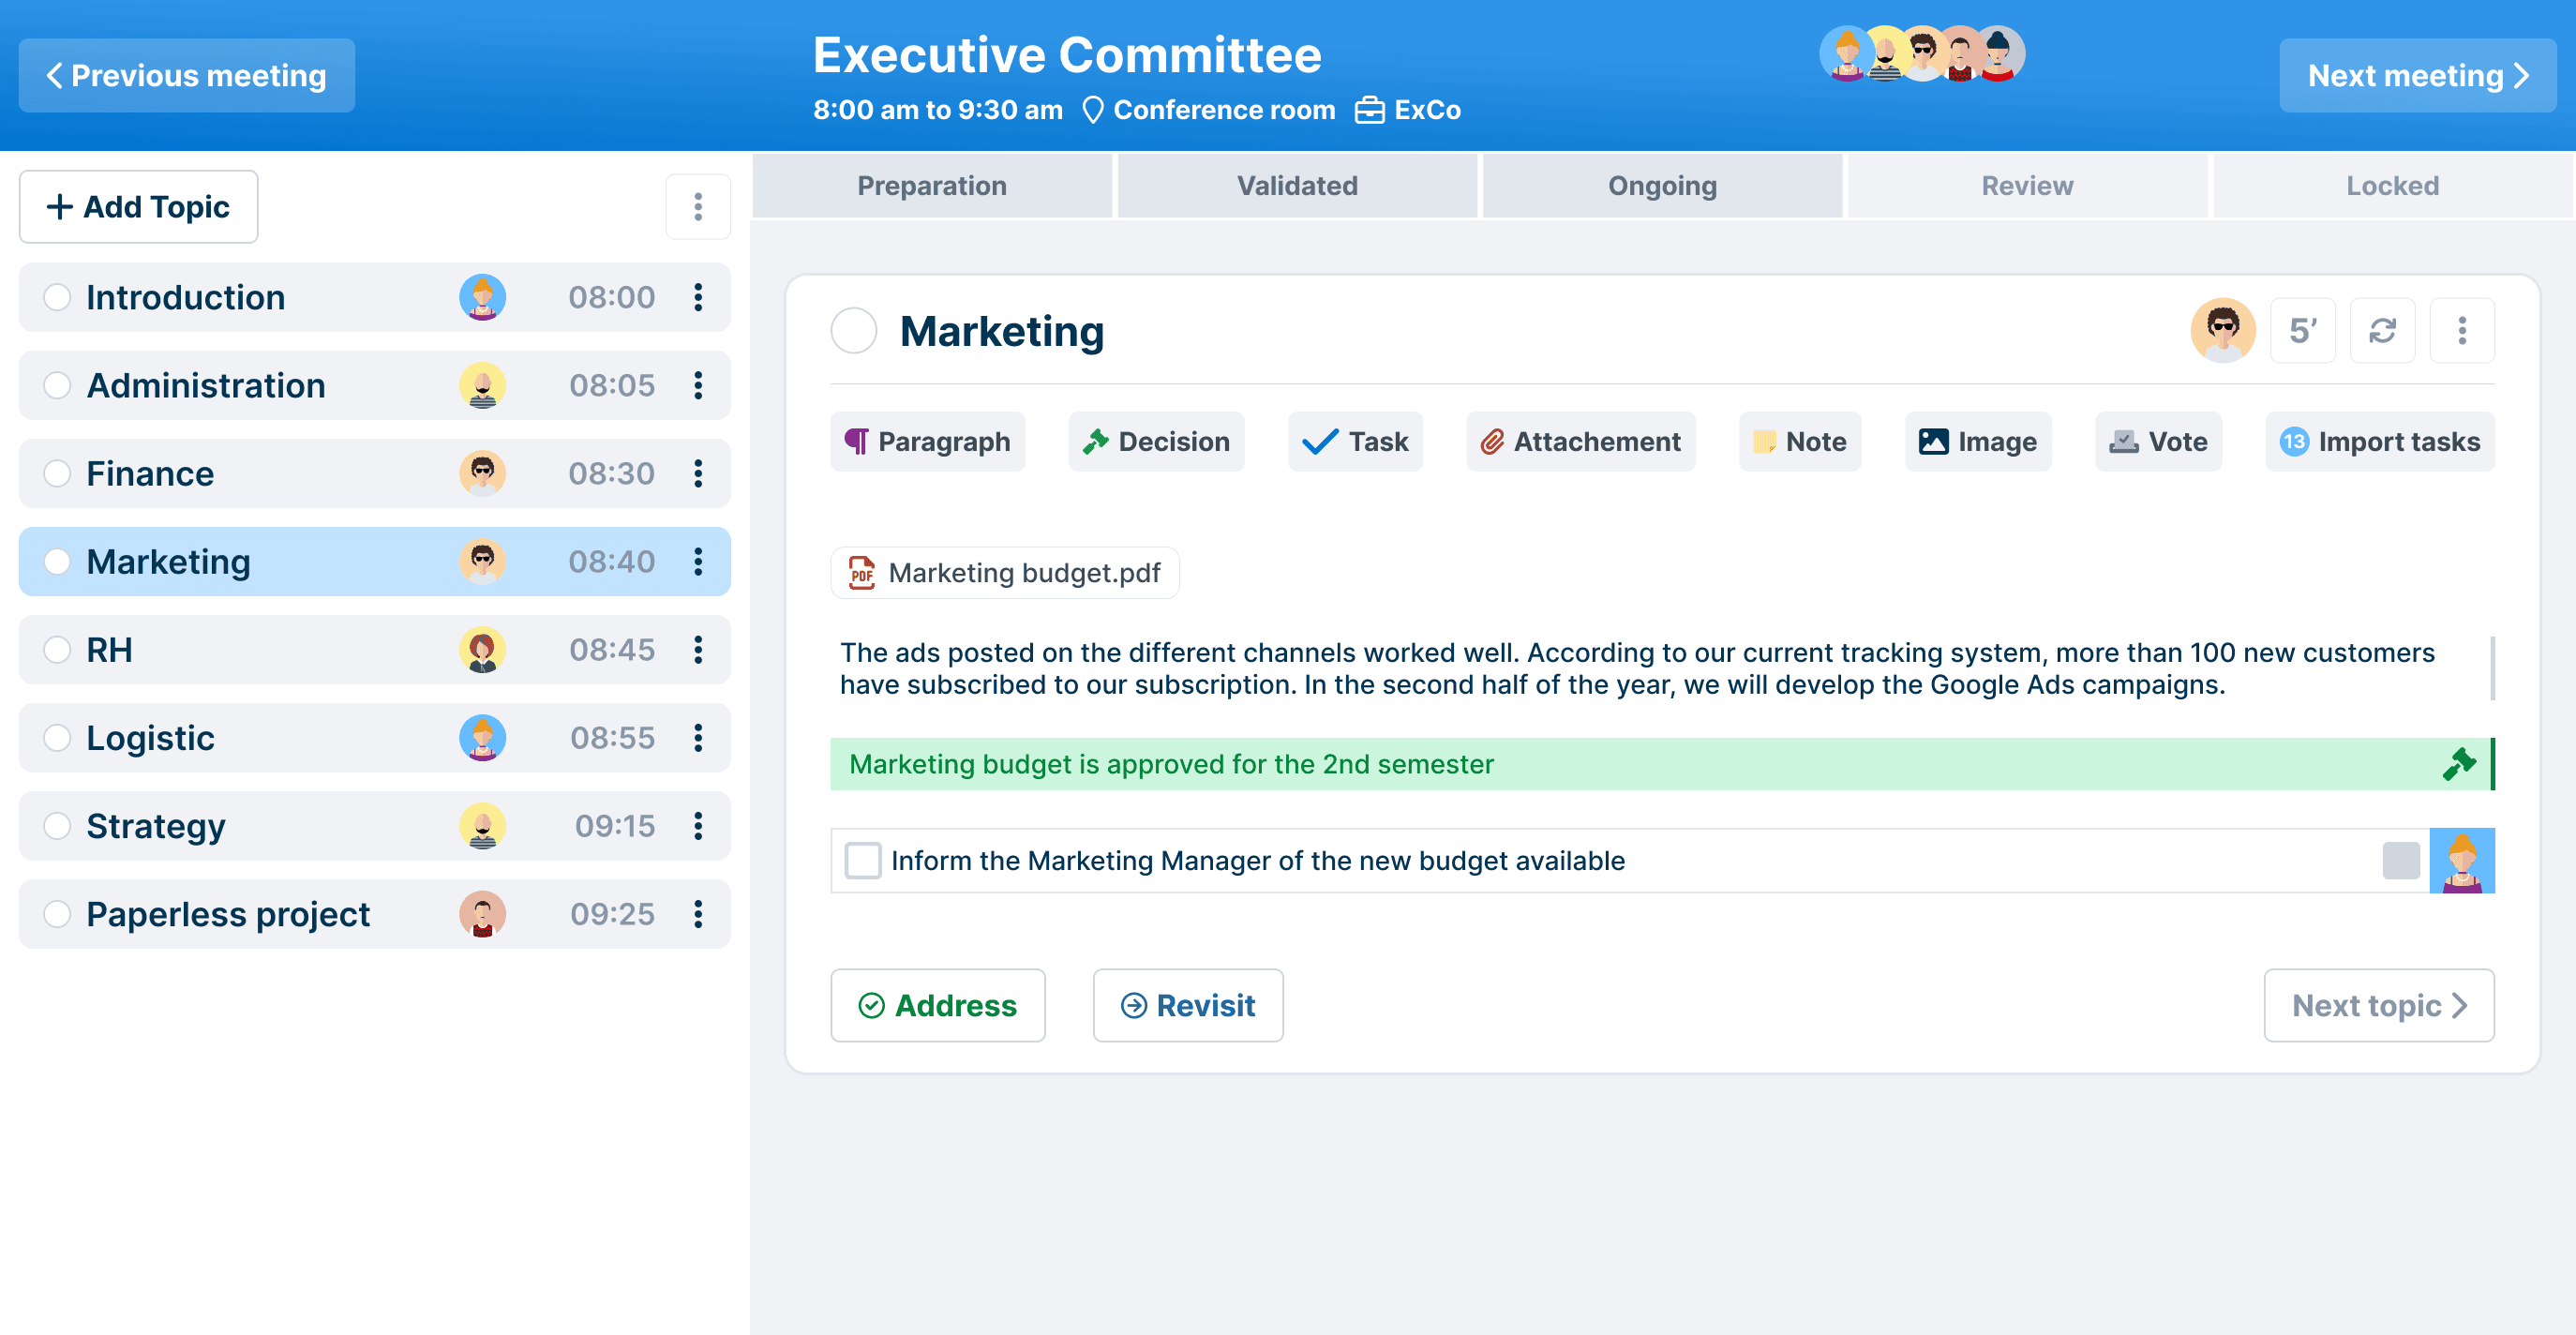 Power your Executive Committees with WEDO